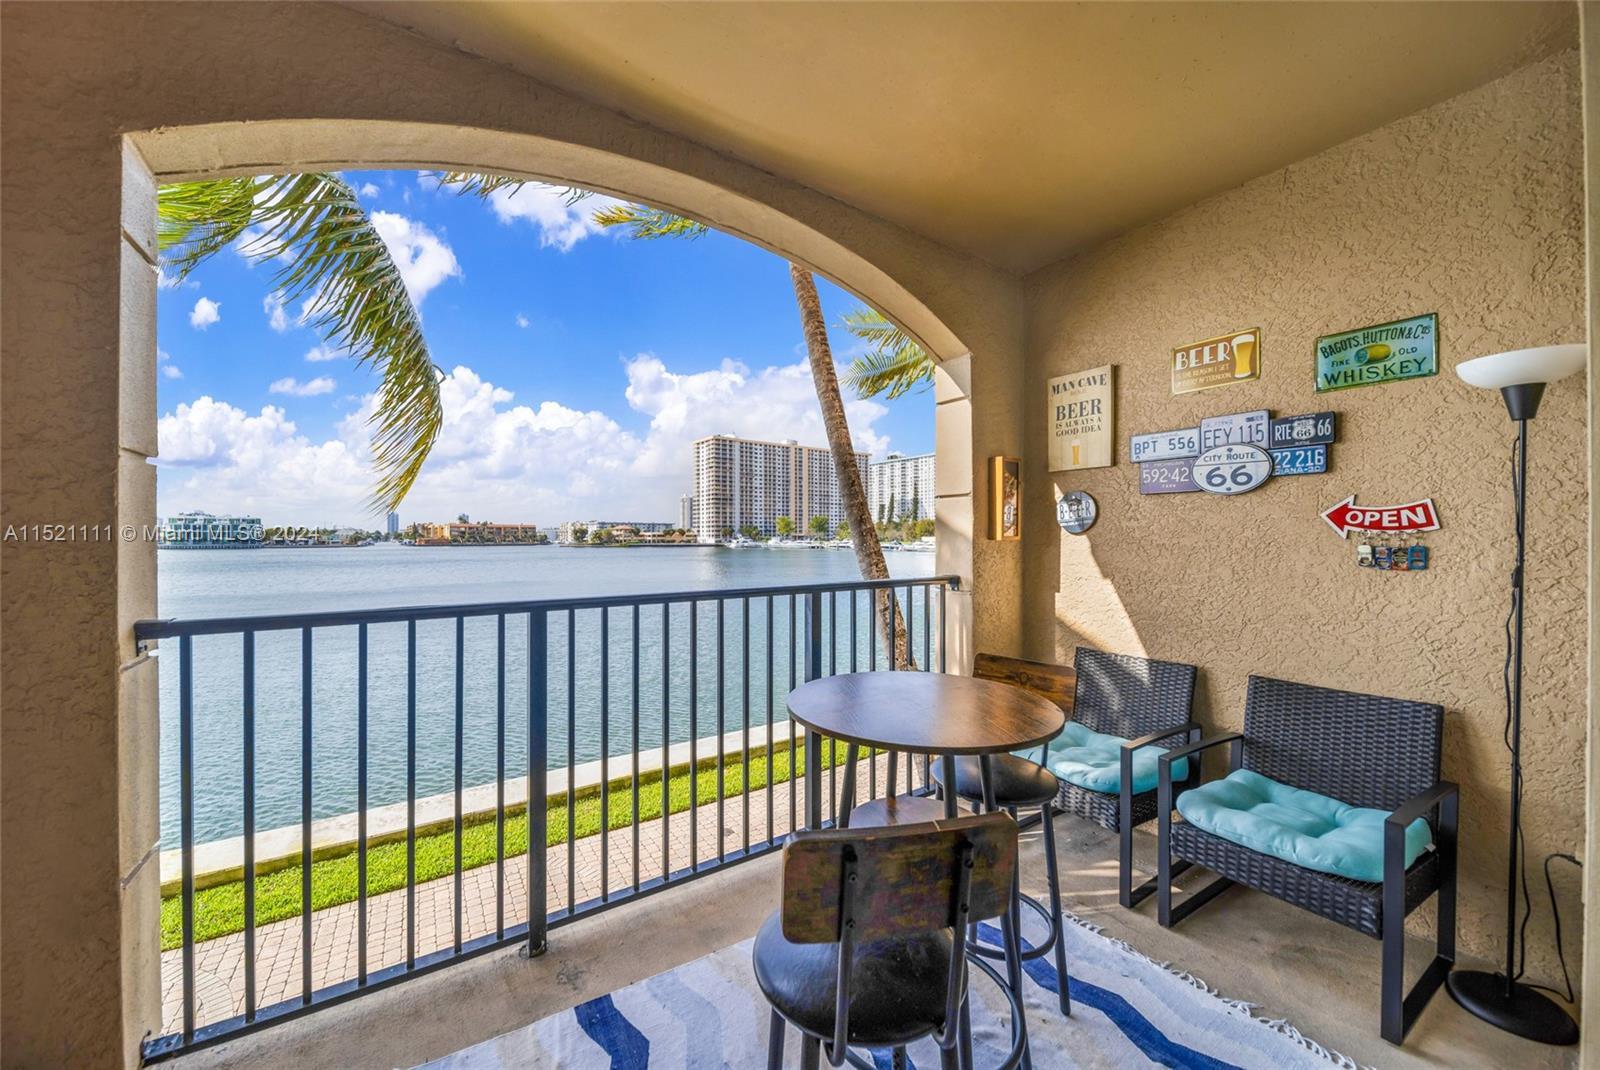 Introducing a stunning 2 bed / 2 bath condo nestled just blocks away from the pristine beaches of Su